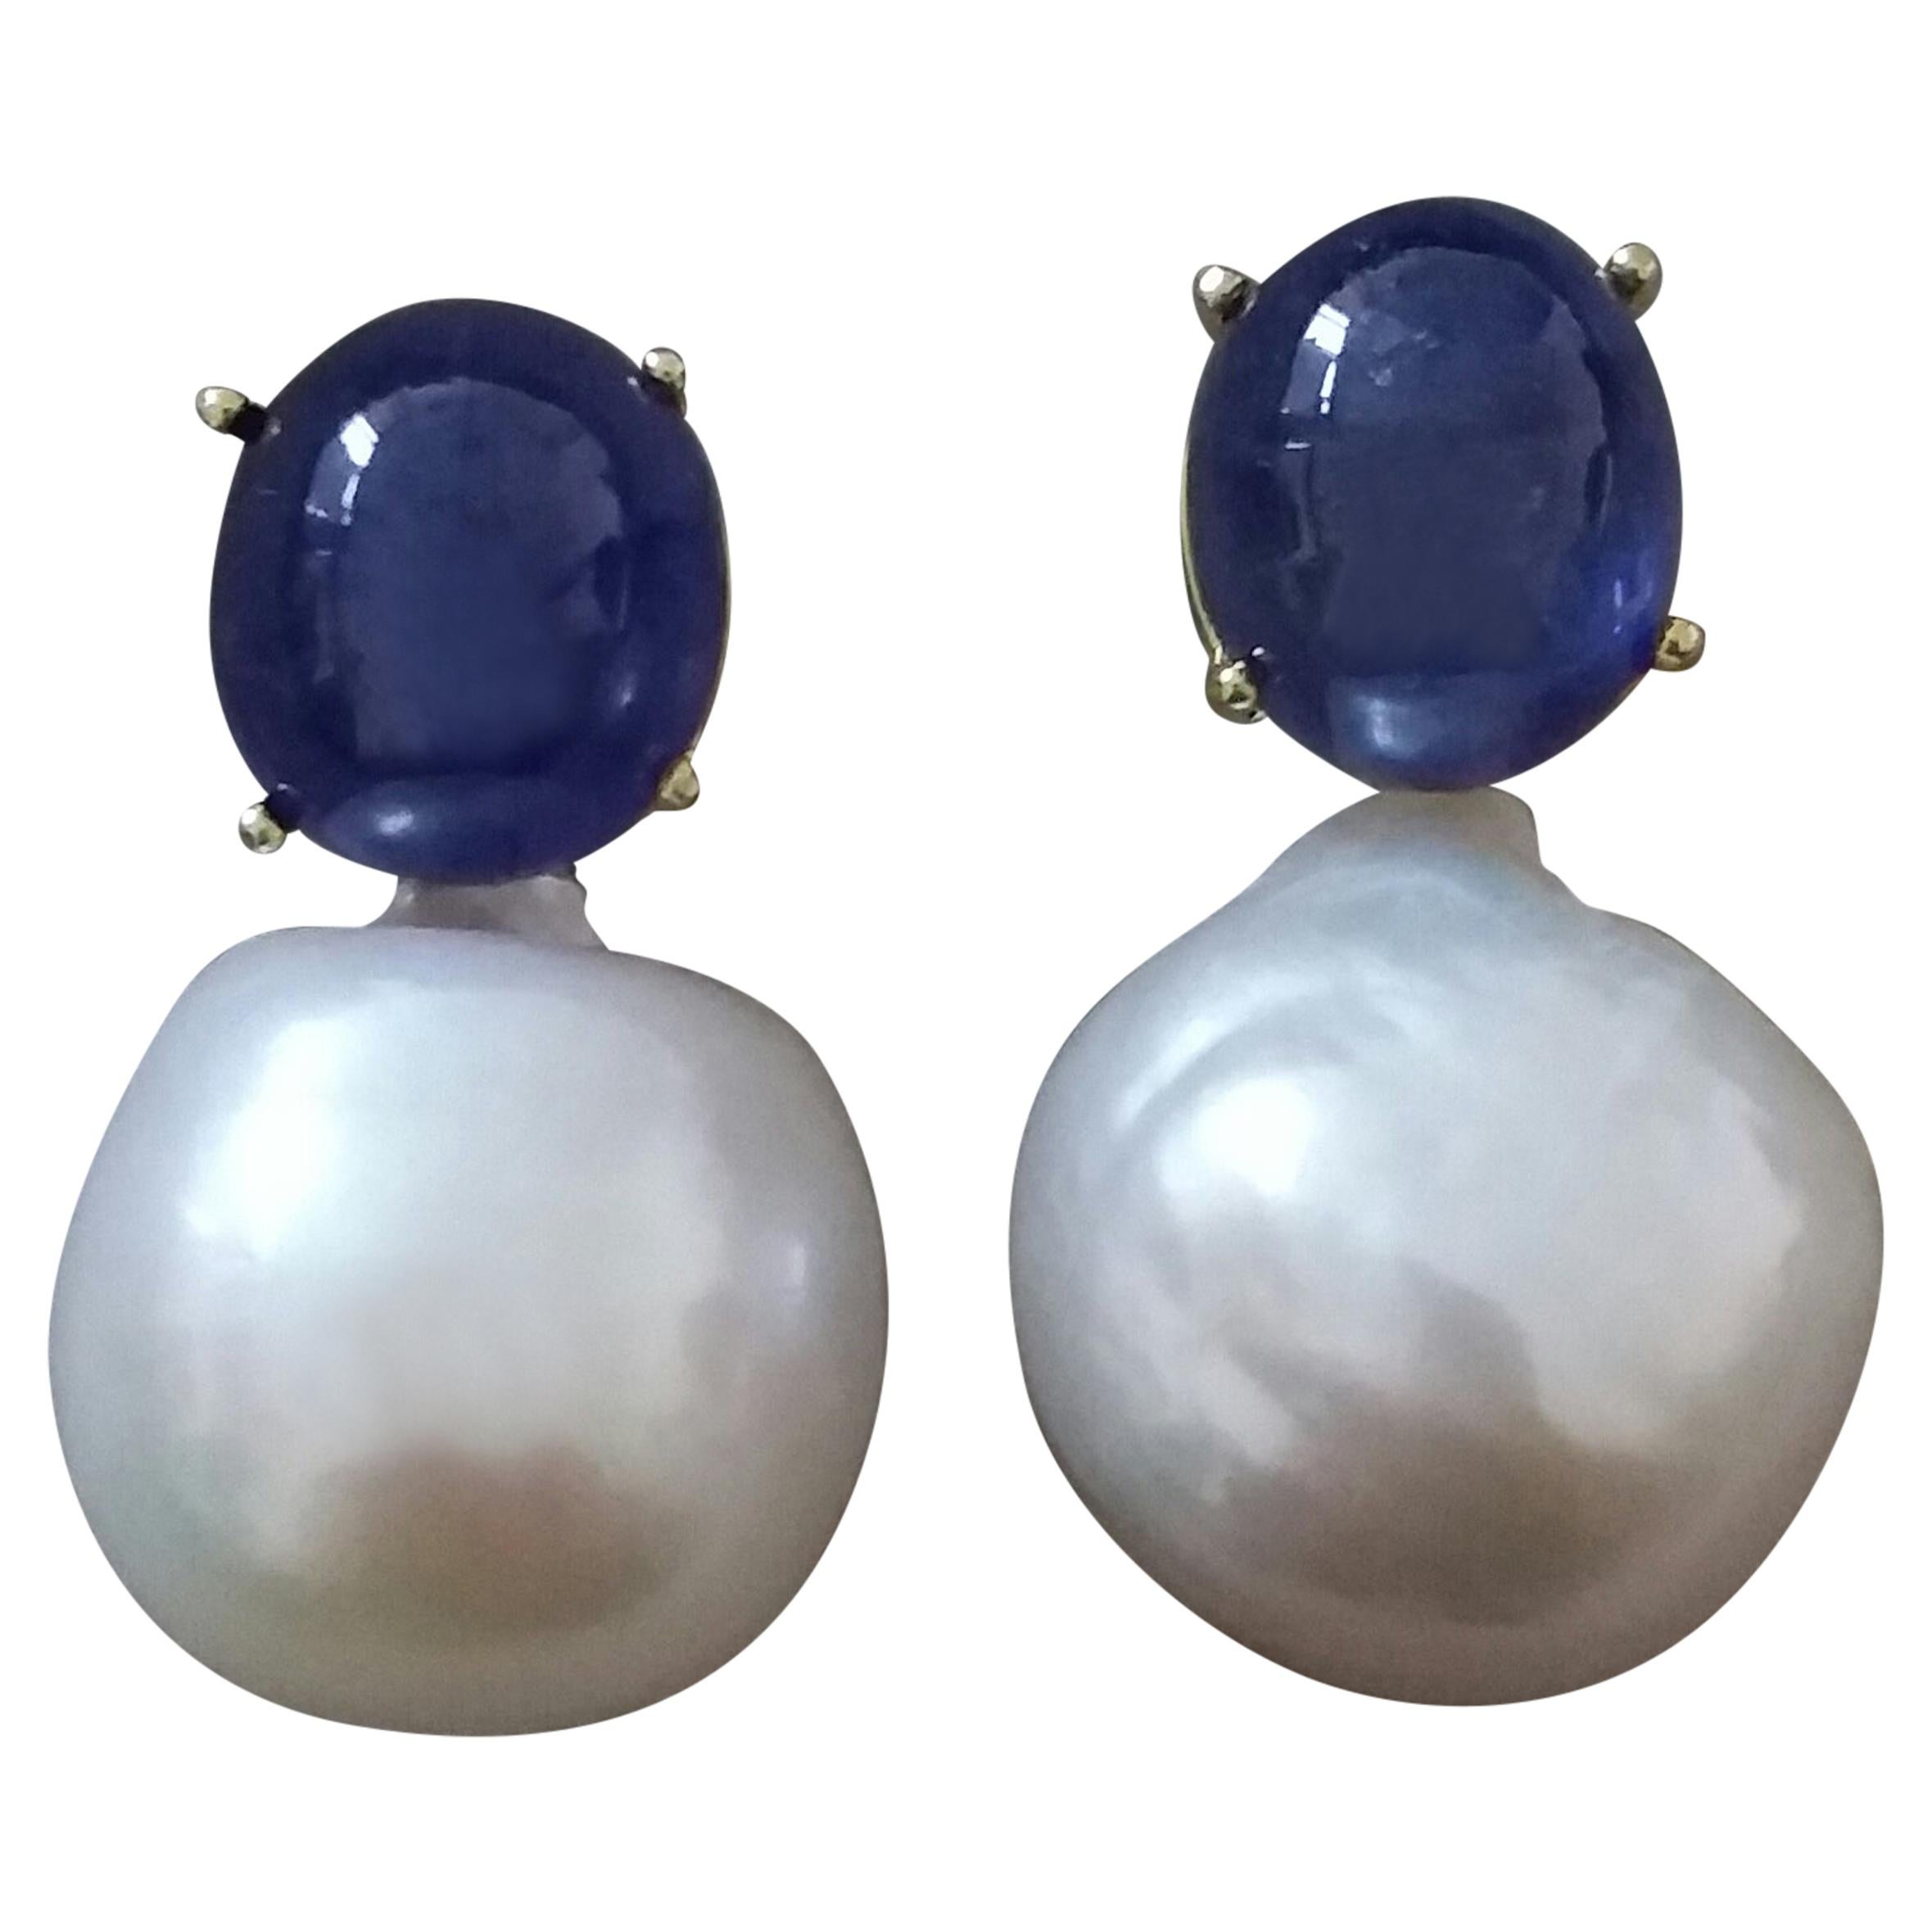 Big Size White Baroque Pearls Oval Blue Sapphires Cabochons Yellow Gold Earrings